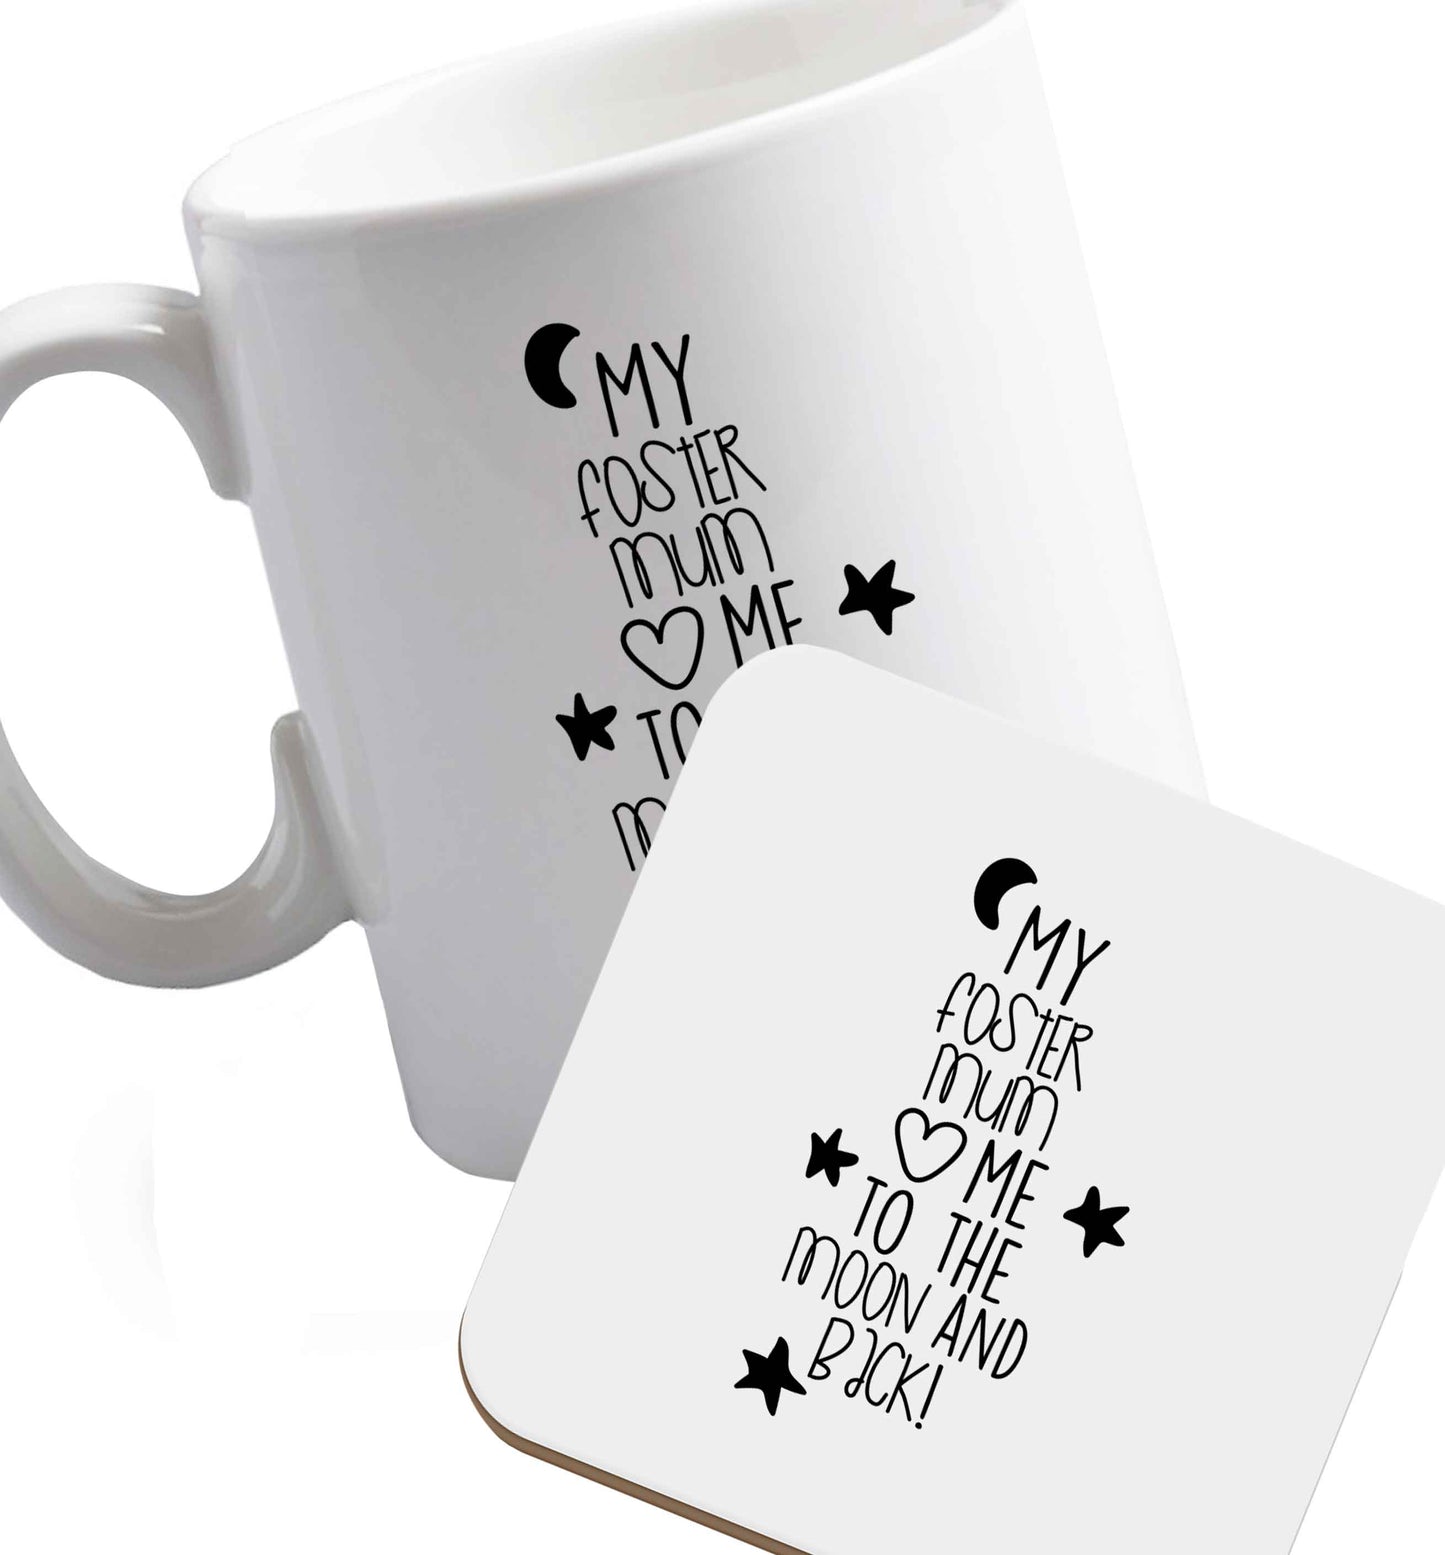 10 oz My foster mum loves me to the moon and back ceramic mug and coaster set right handed